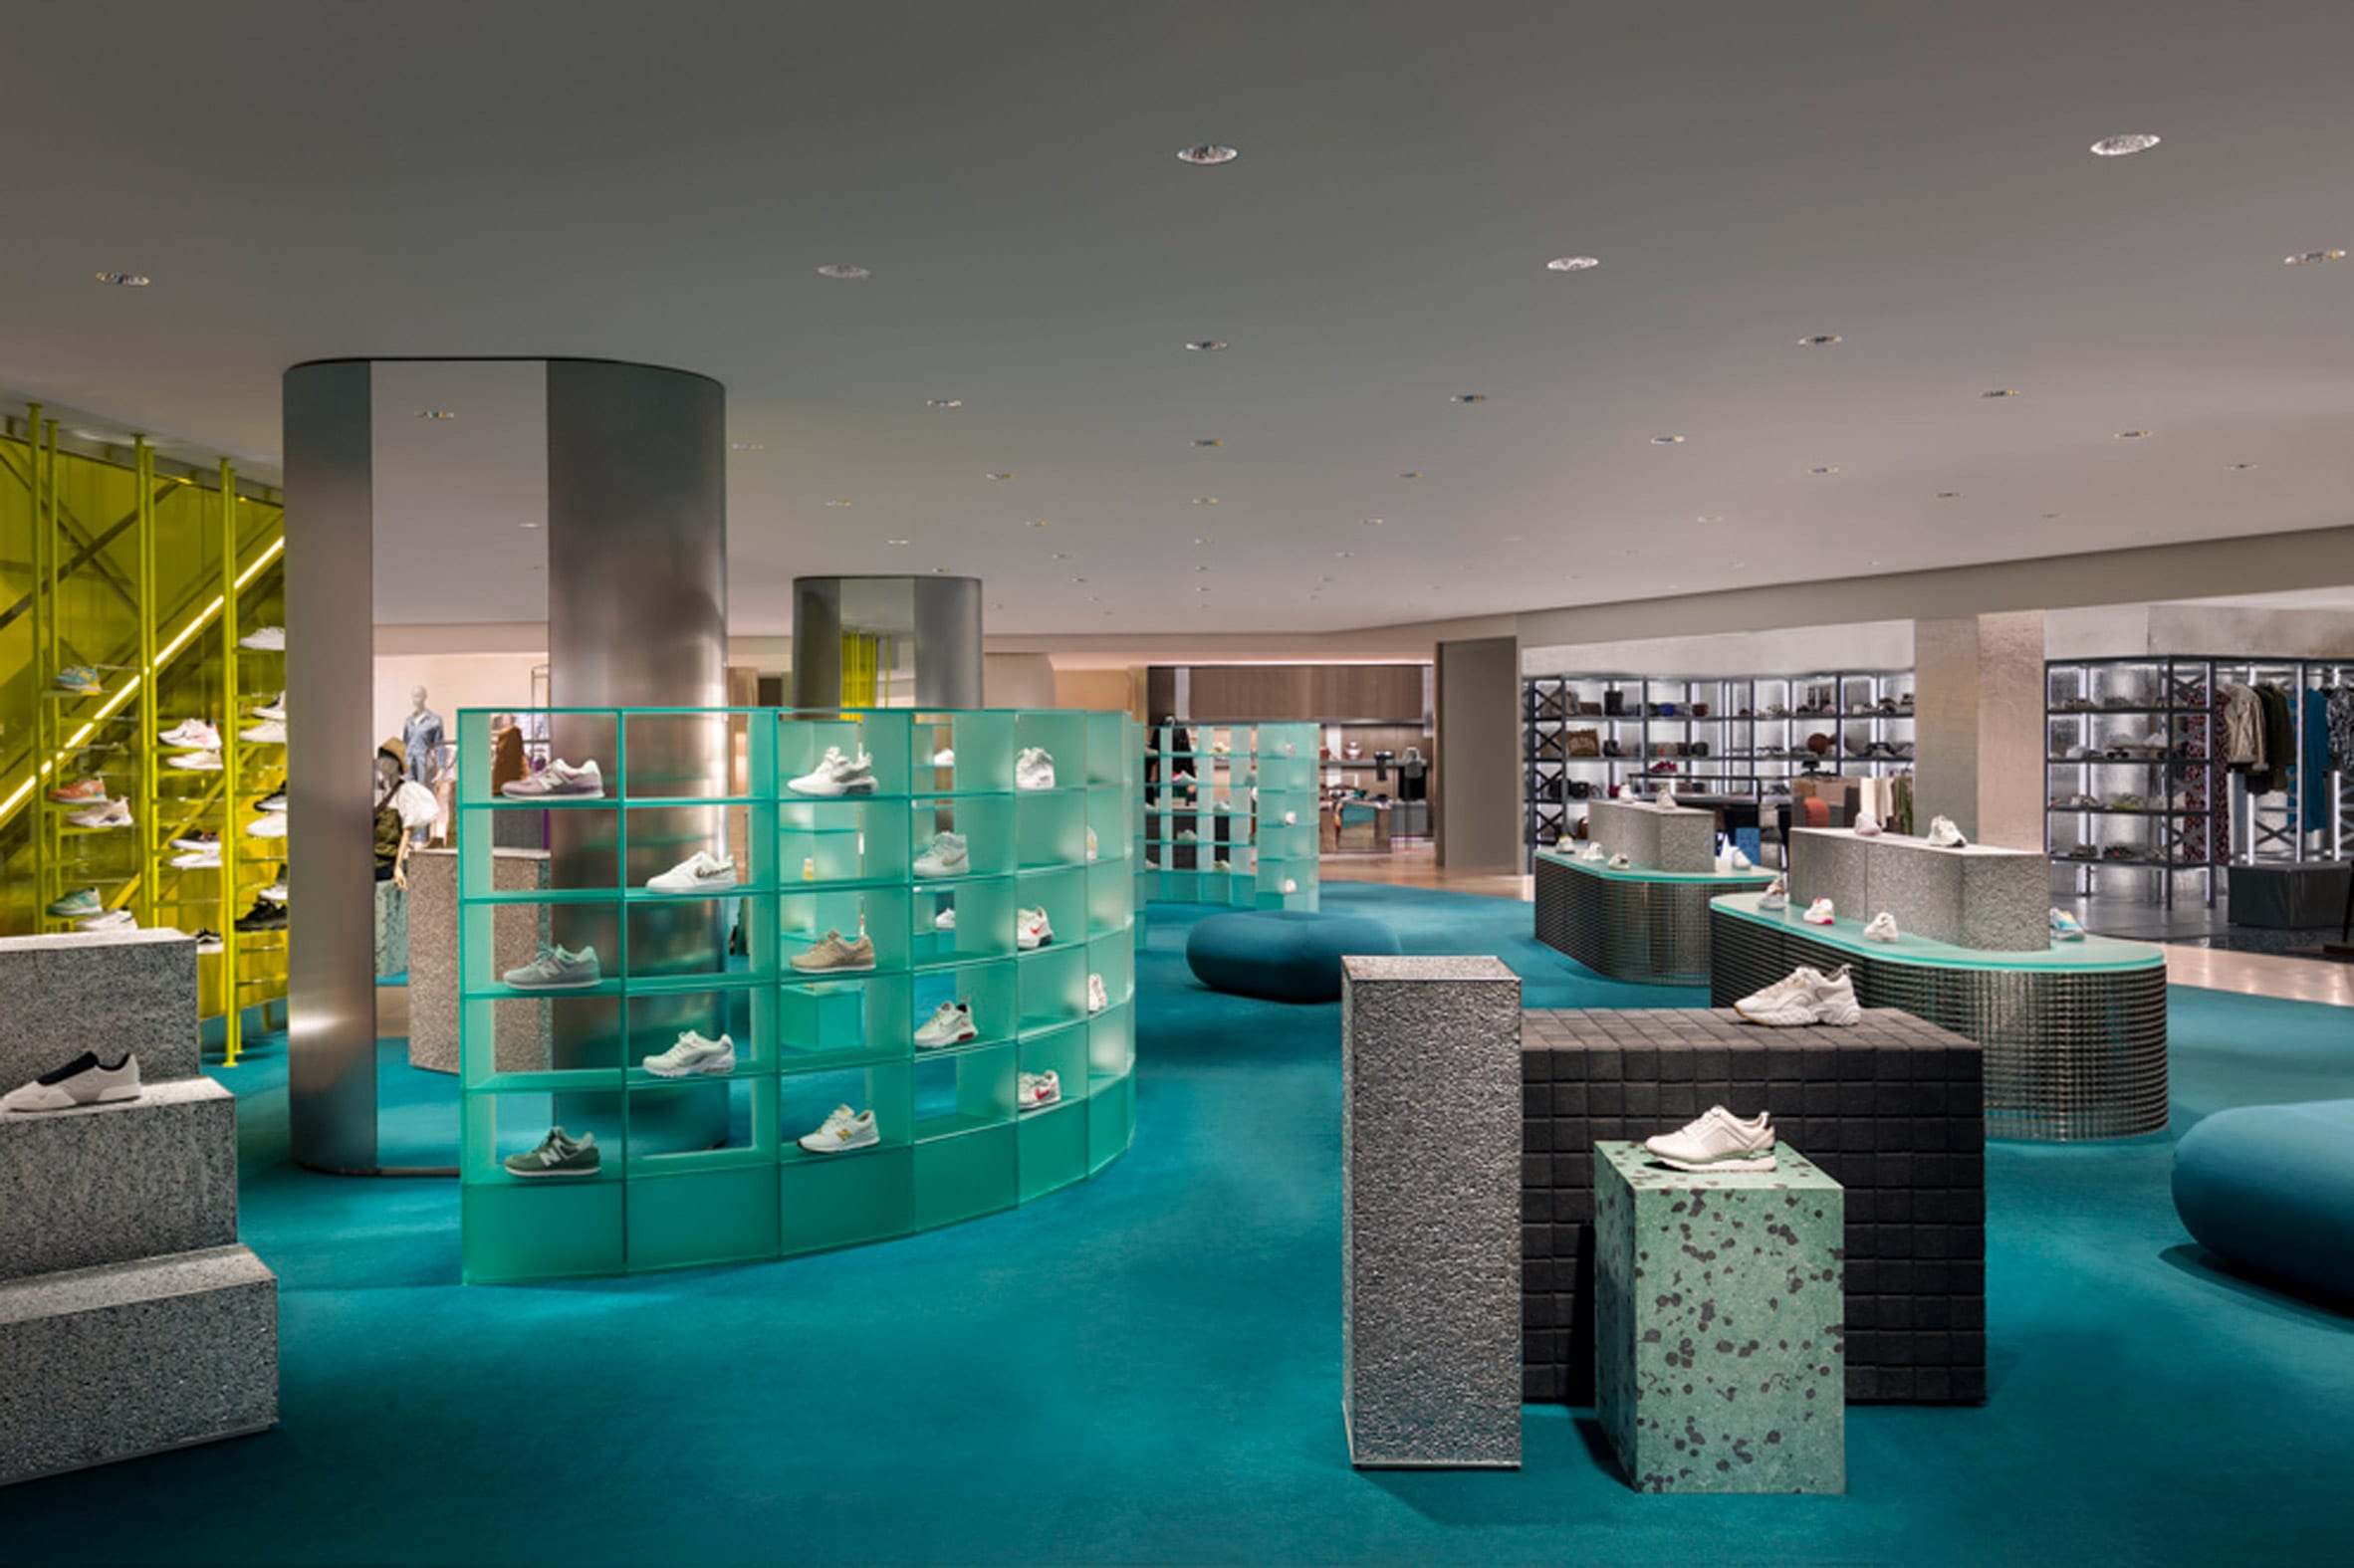 Overview of La Rinascente womenswear department with blue carpet and grey displays